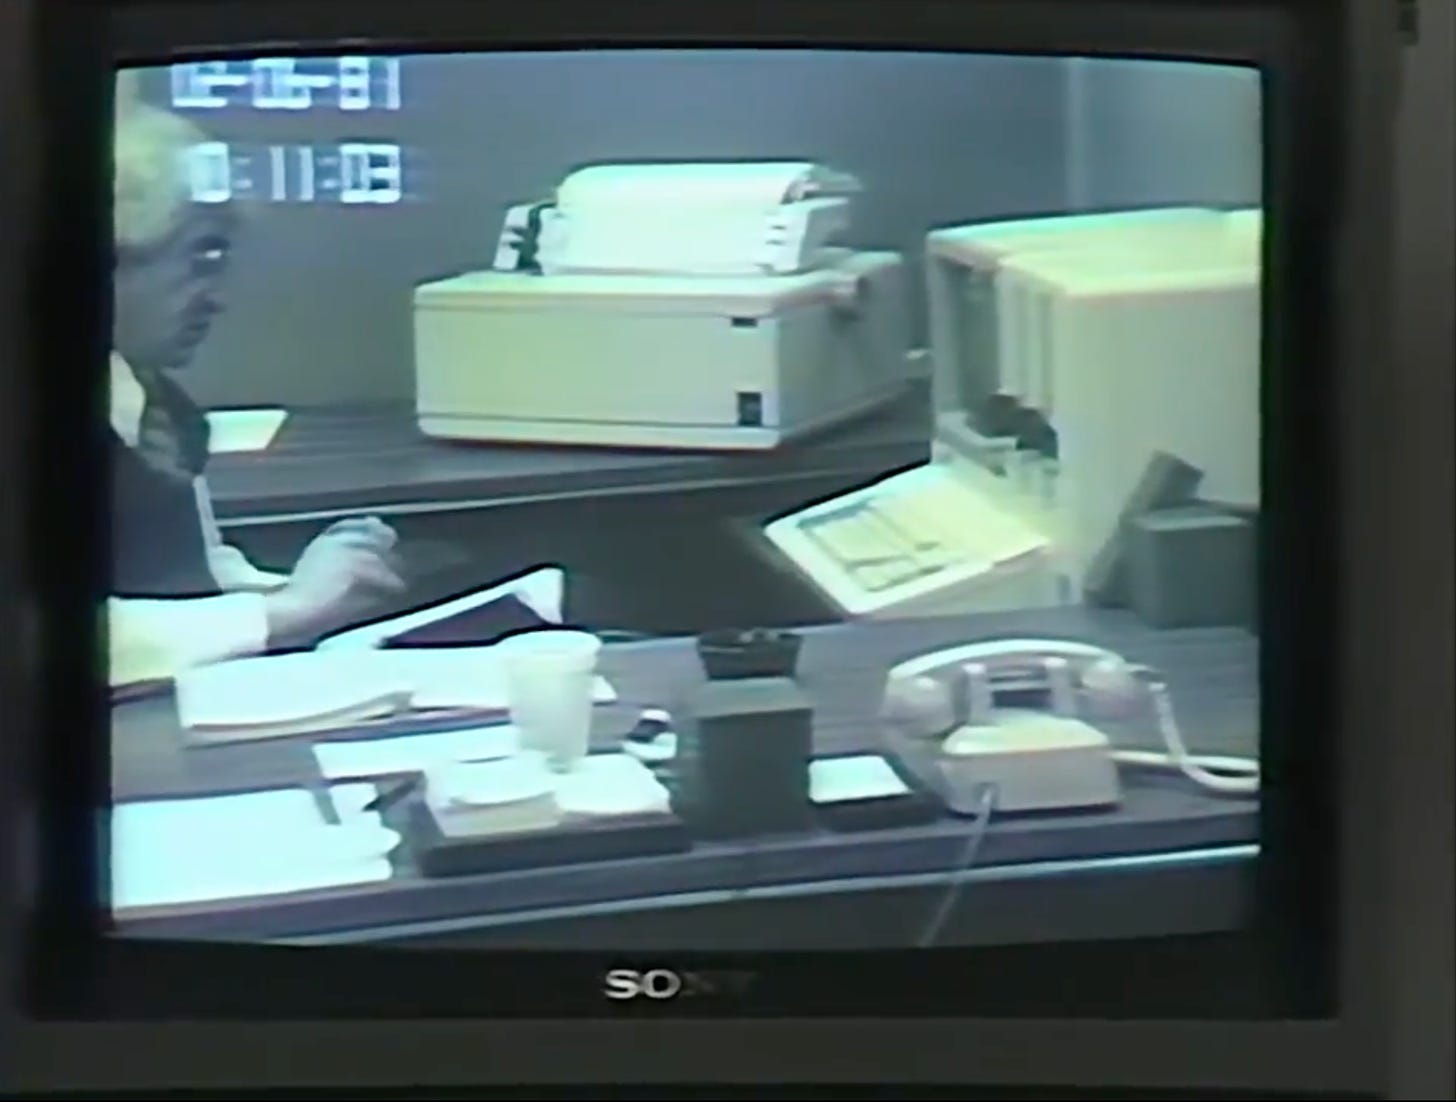 A screencap of a clip from a usability test in 1981